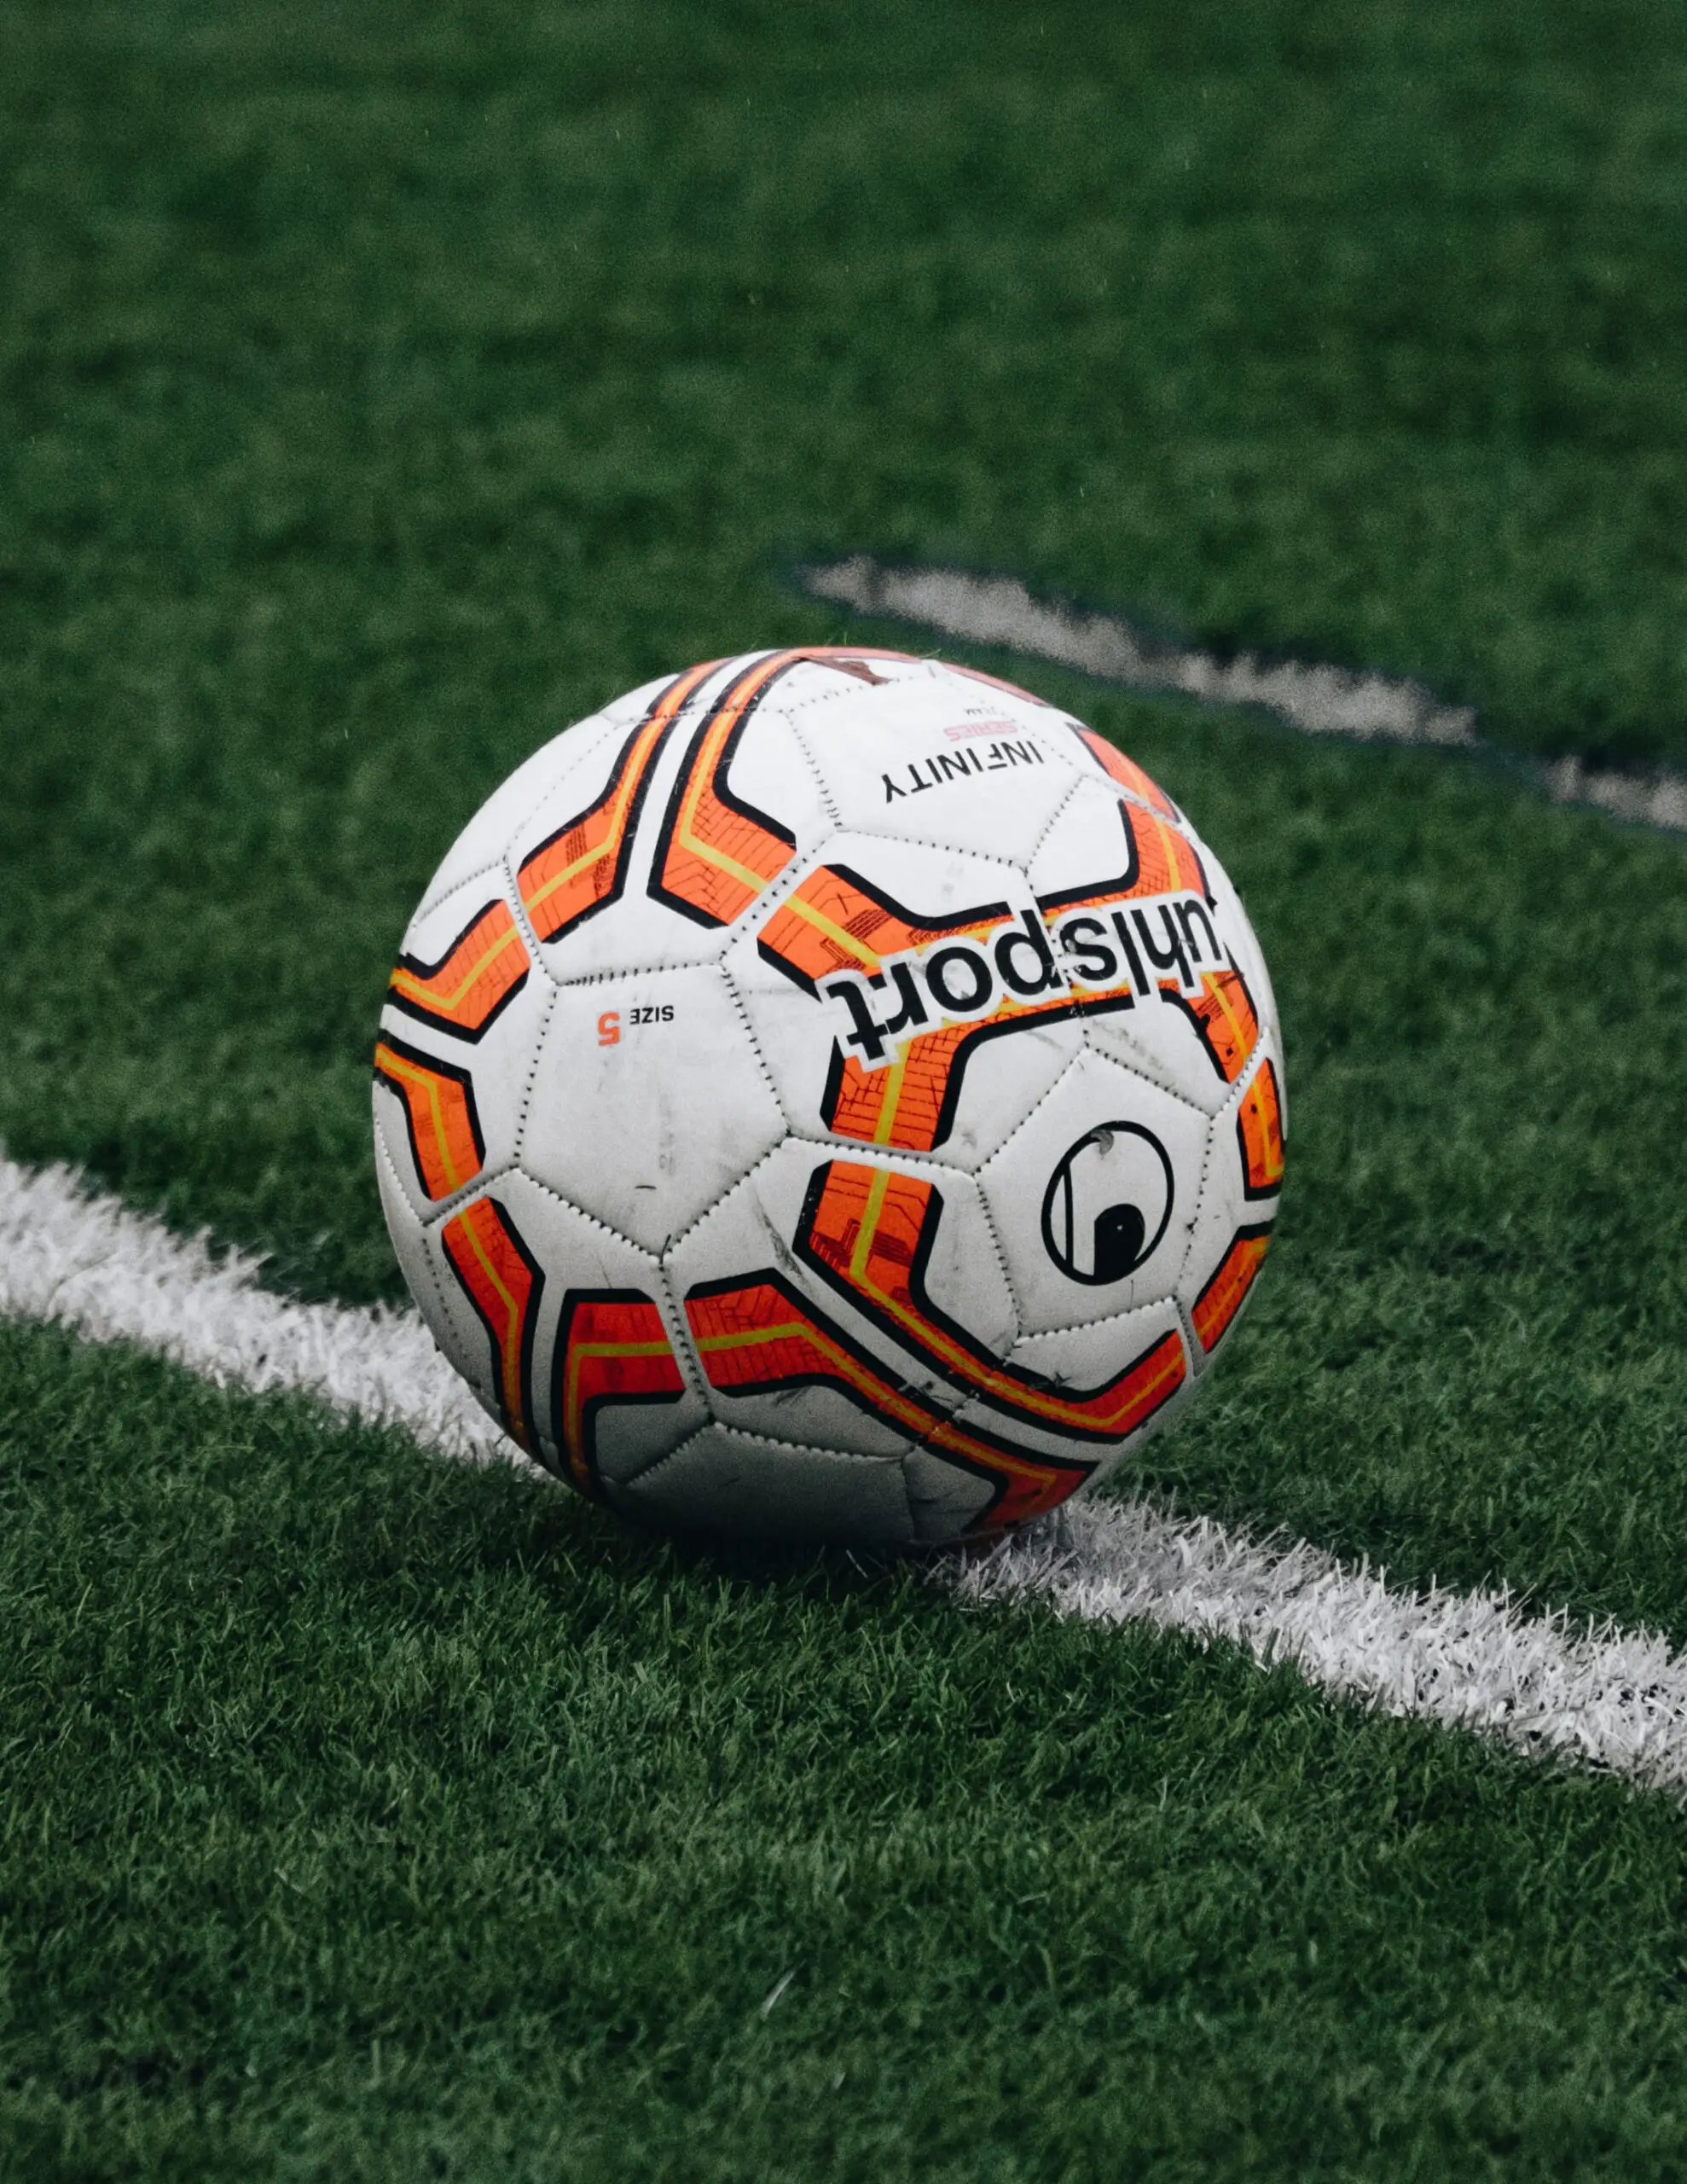 A picture of a soccer match ball